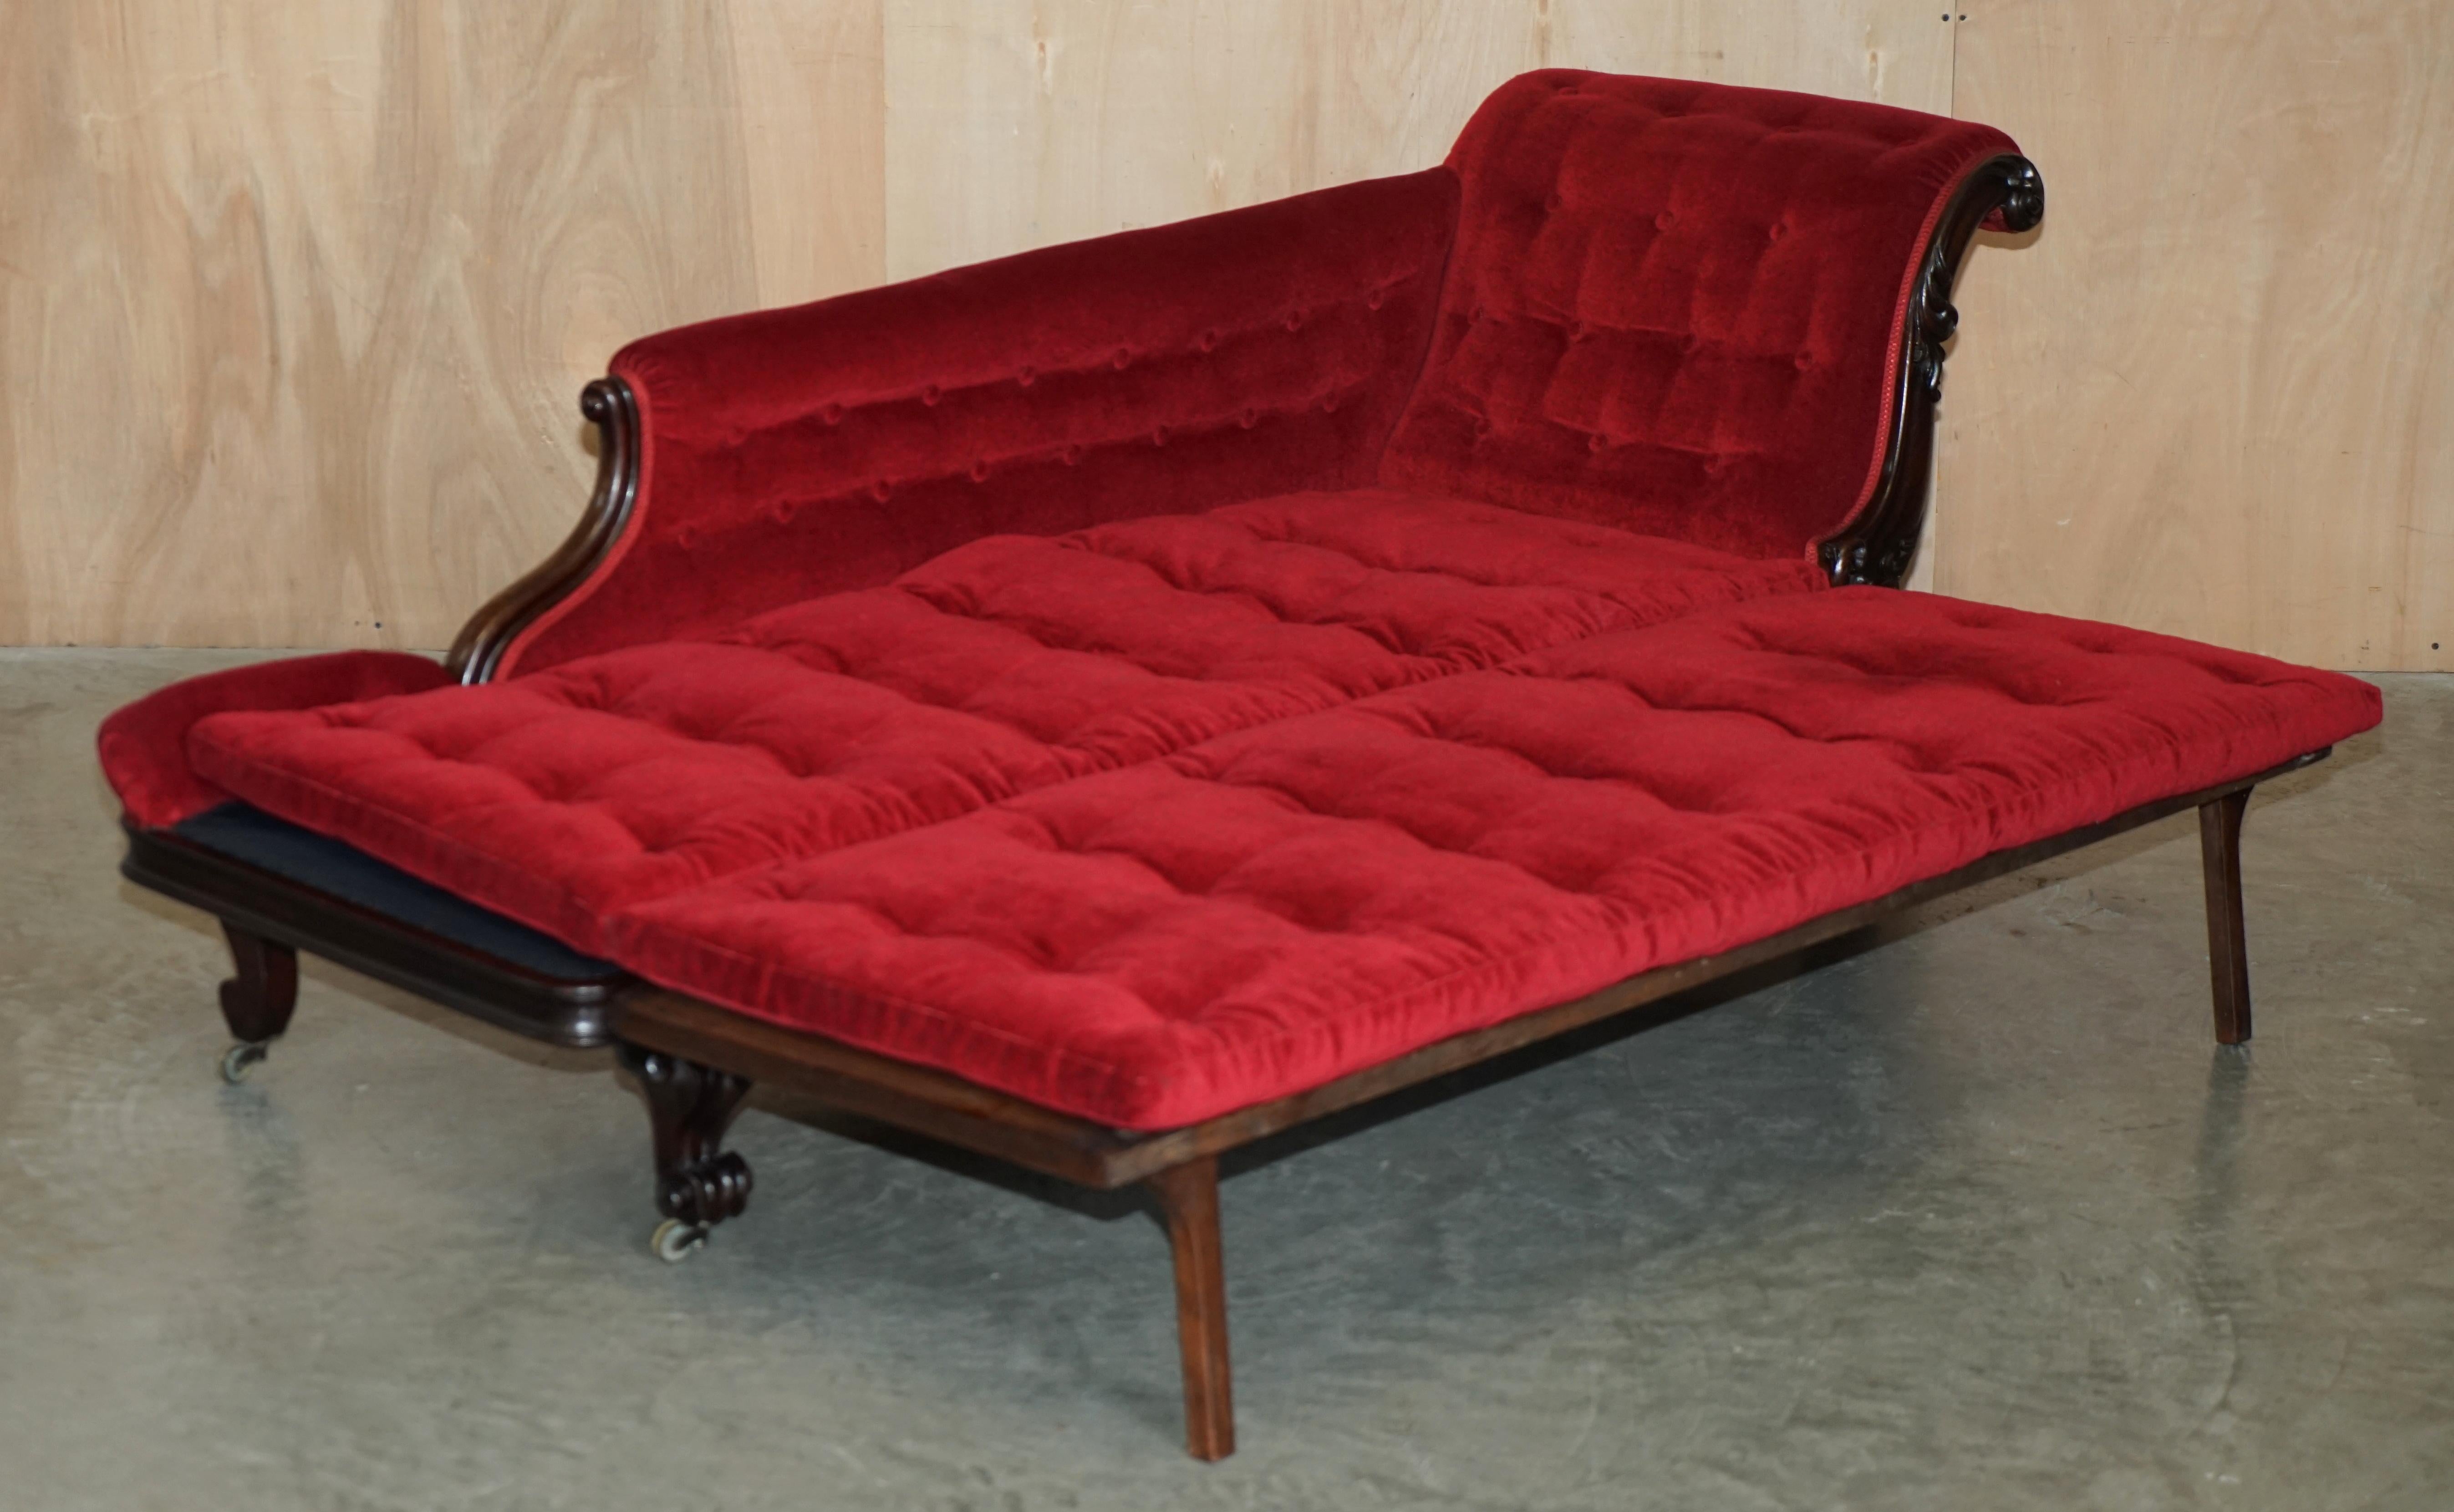 Rare Antique William iv circa 1830 Hardwood Chesterfield Extending Chaise Lounge For Sale 8